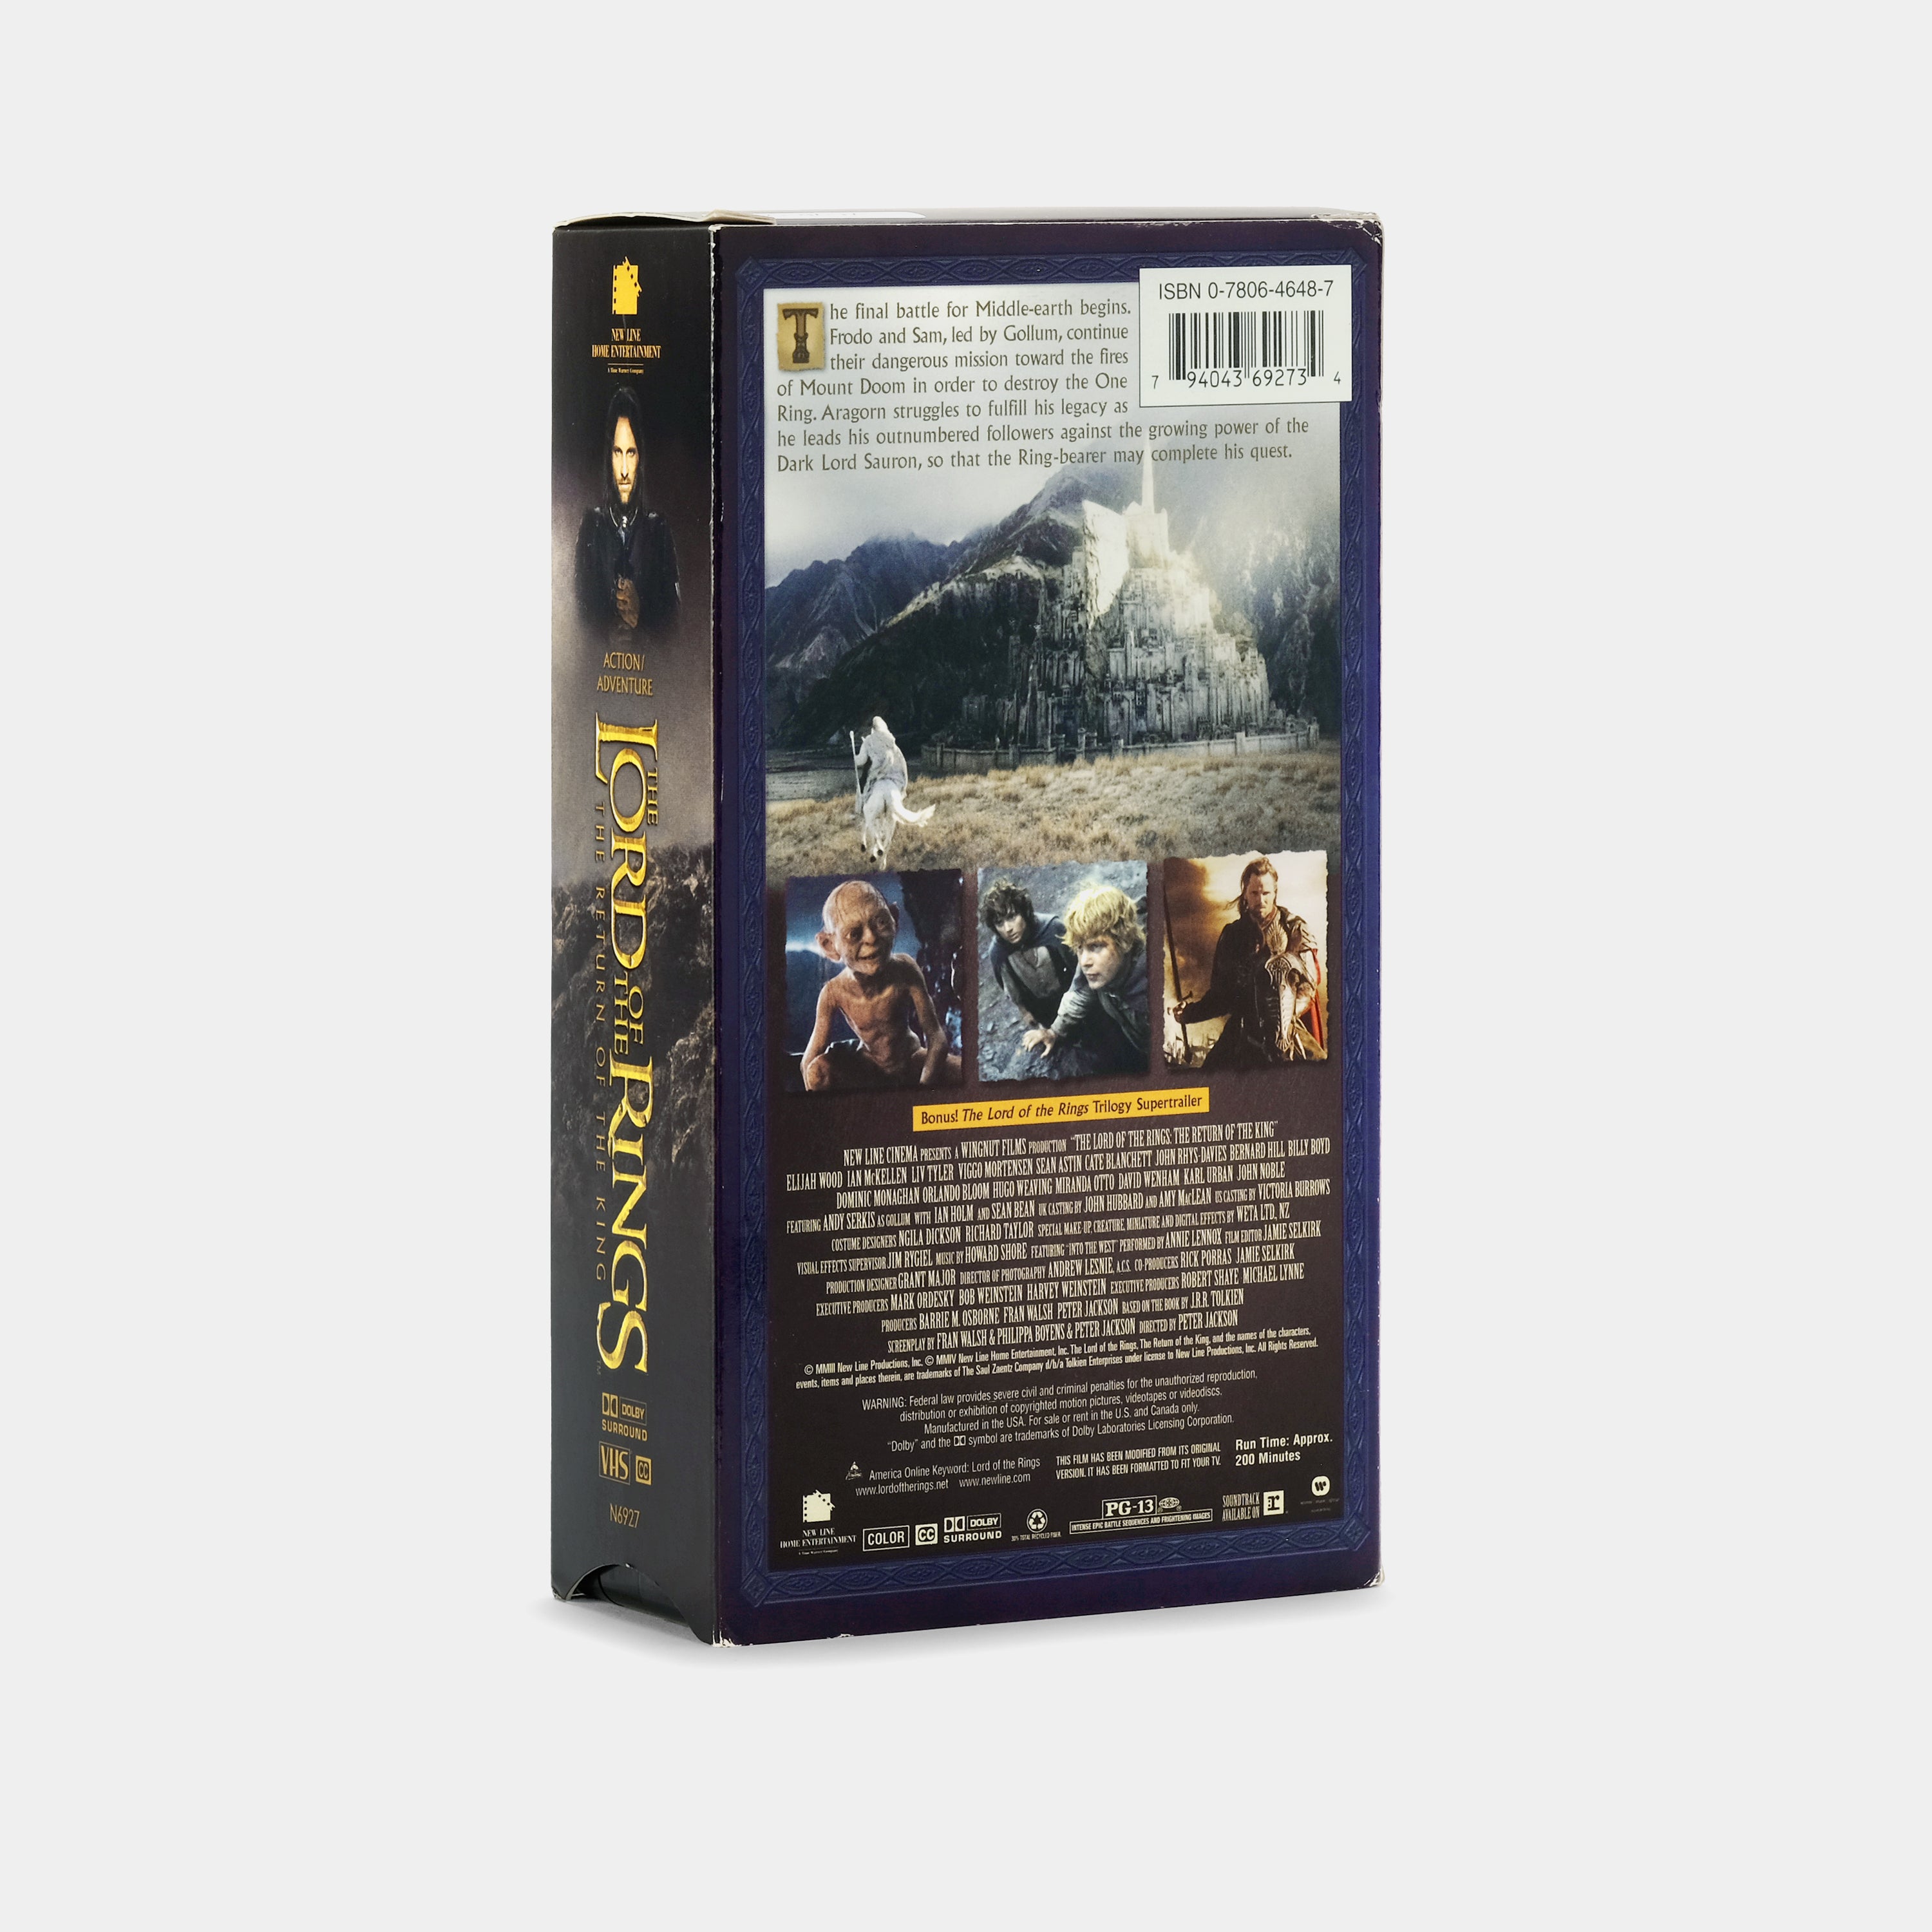 The Lord of the Rings: The Return of the King VHS Tape